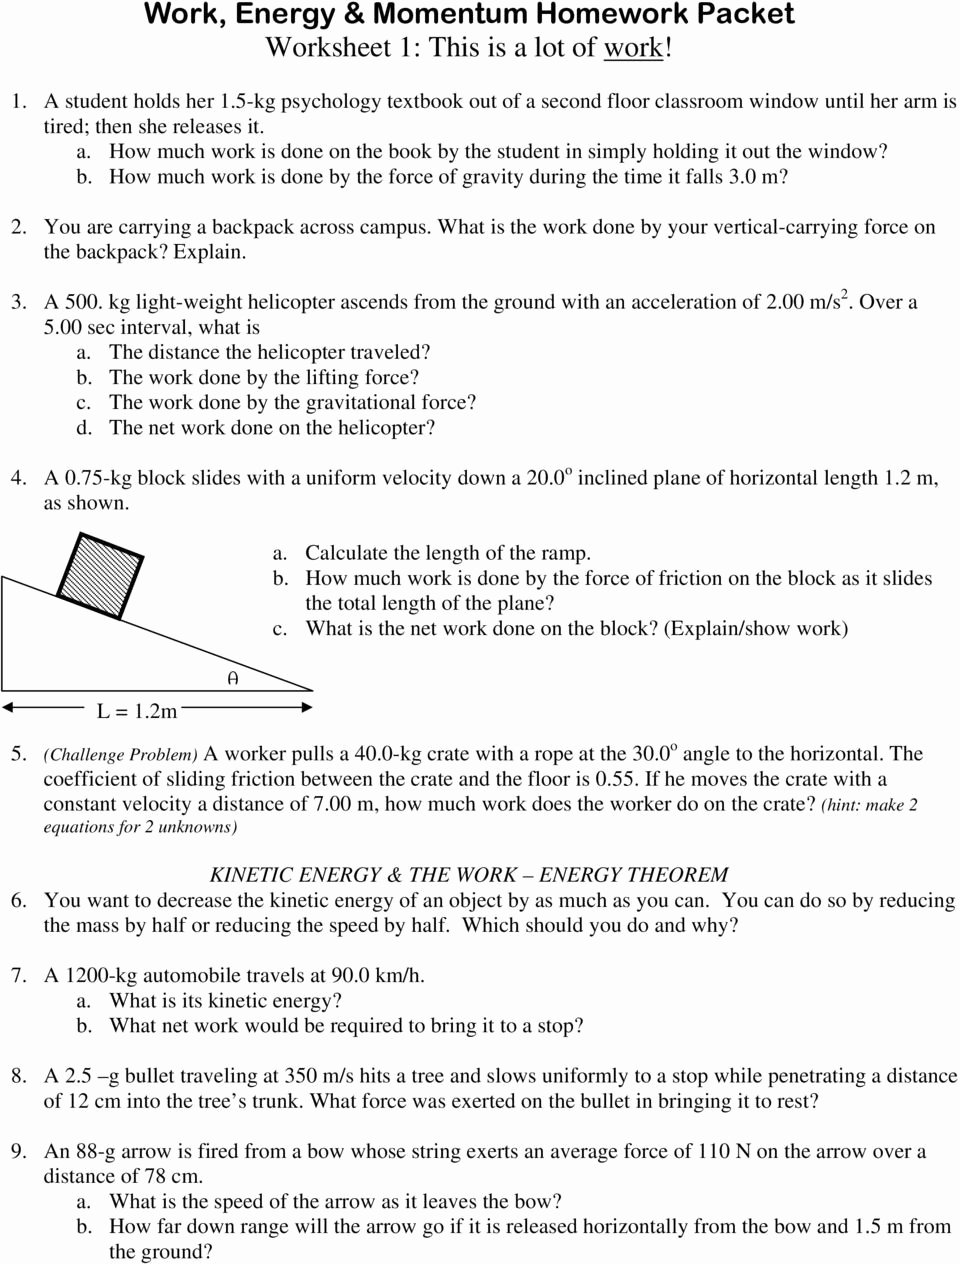 Coefficient Of Friction Worksheet Answers Awesome 39 Coefficient Friction Worksheet